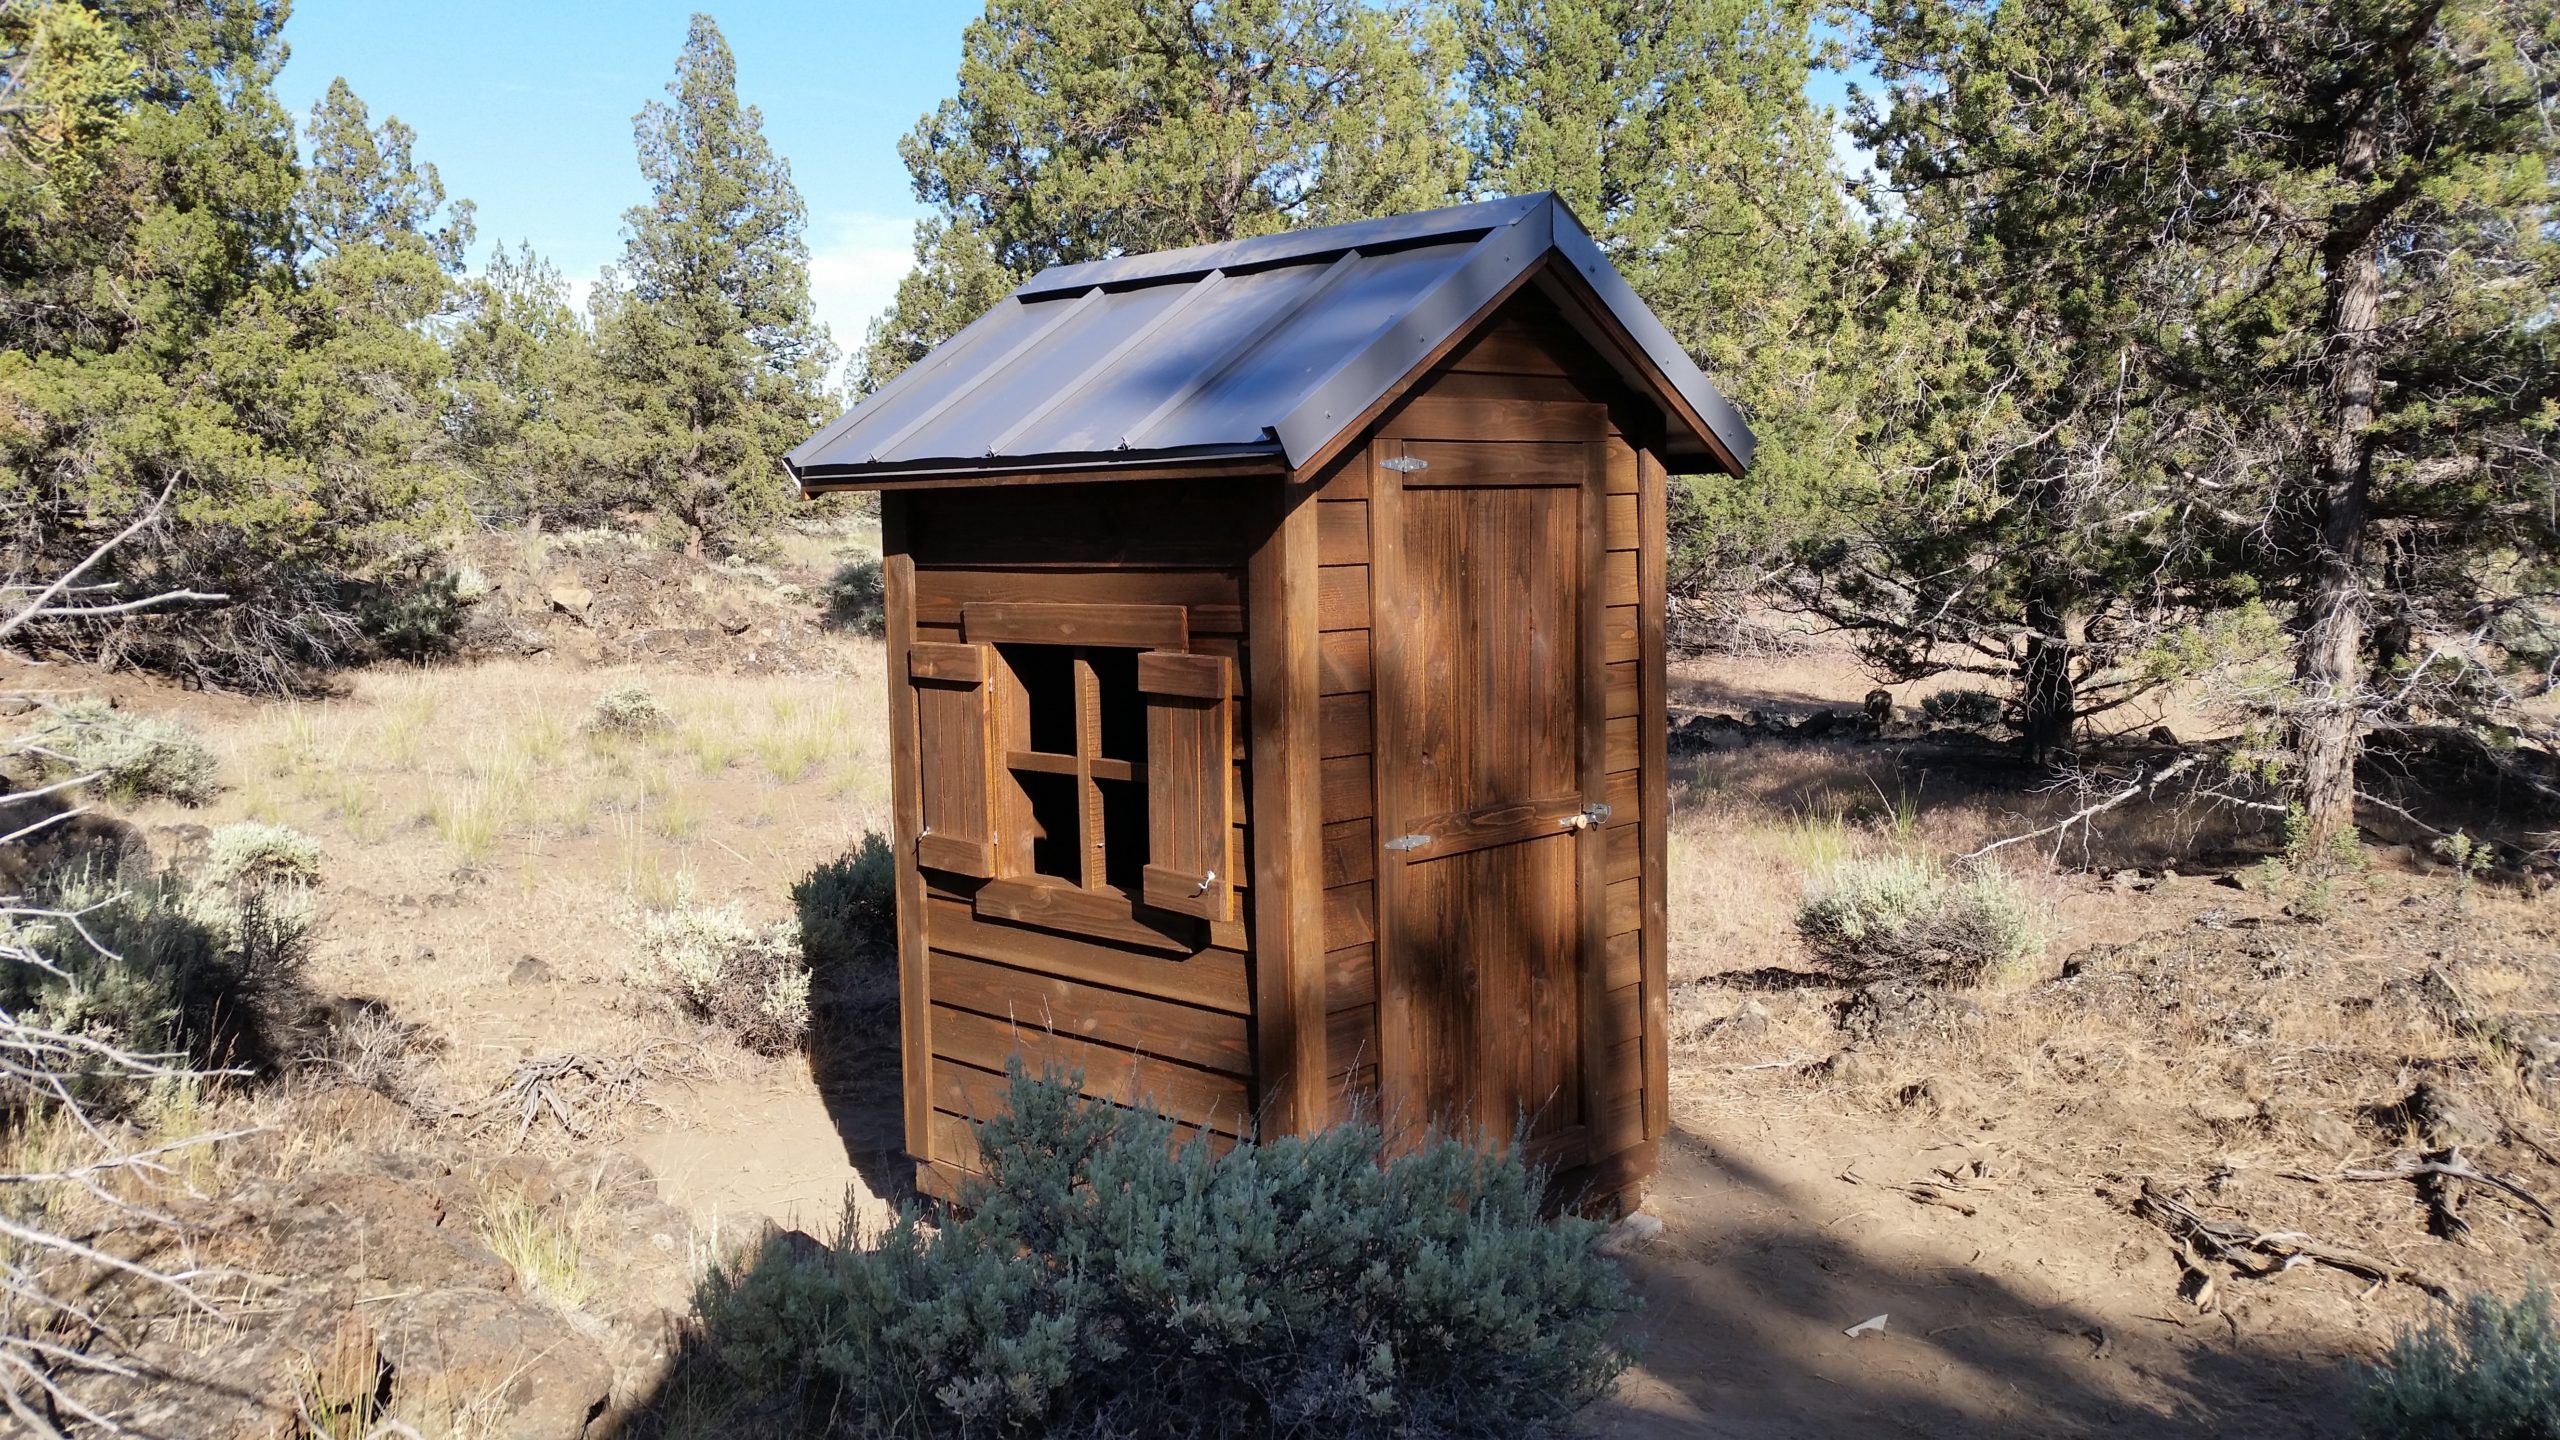 Oregontimberwerks | Rustic Cabins, Playhouses, Sheds, and ...